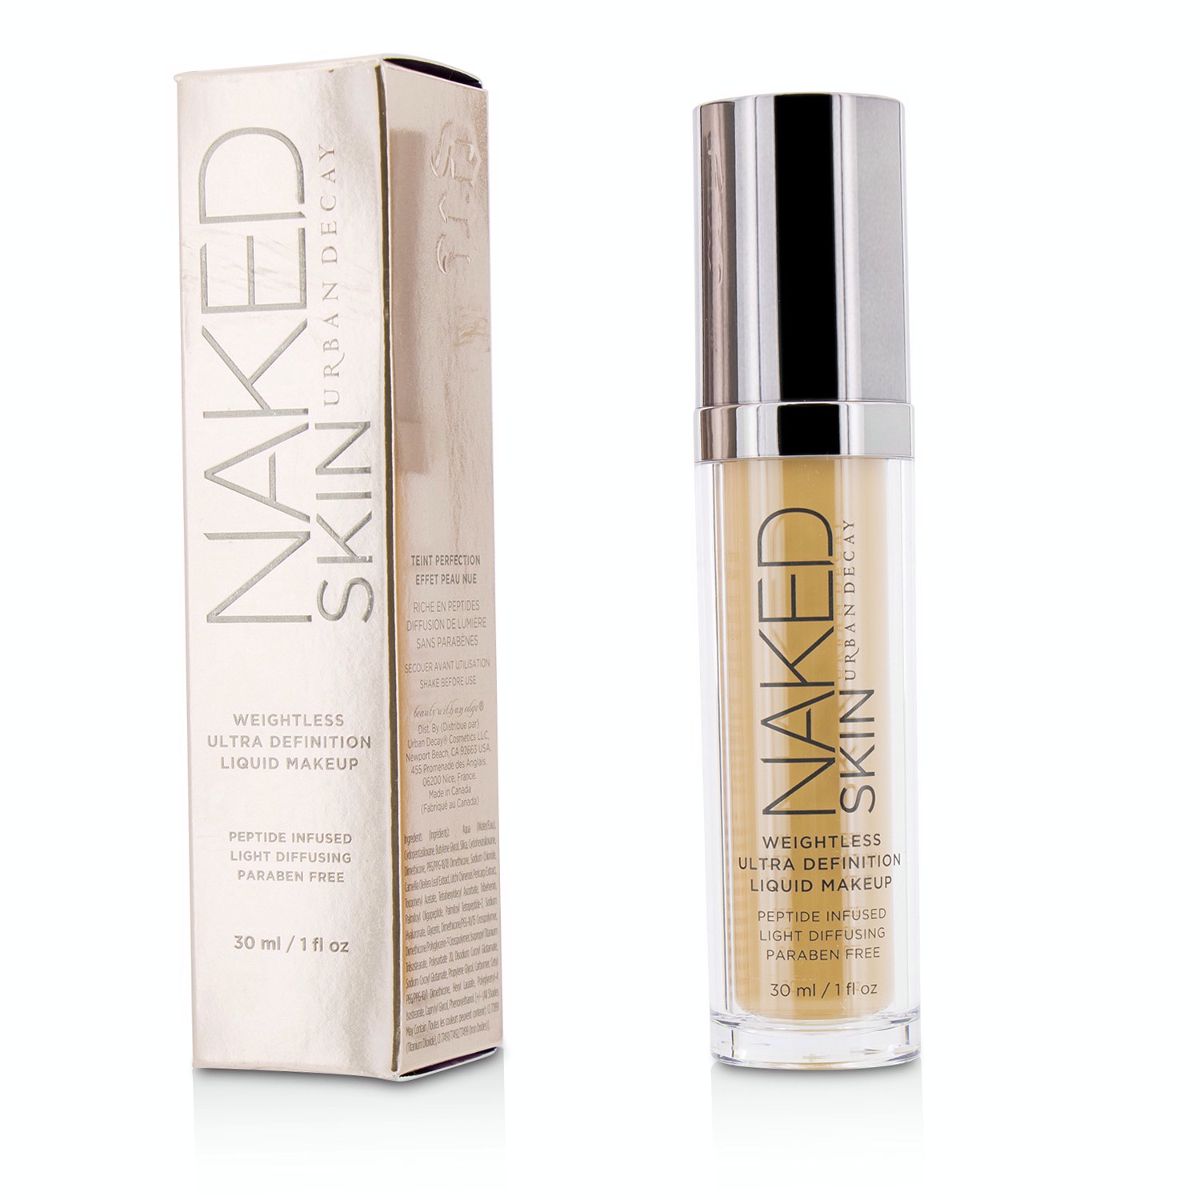 Naked Skin Weightless Ultra Definition Liquid Makeup - #3.0 Urban Decay Image